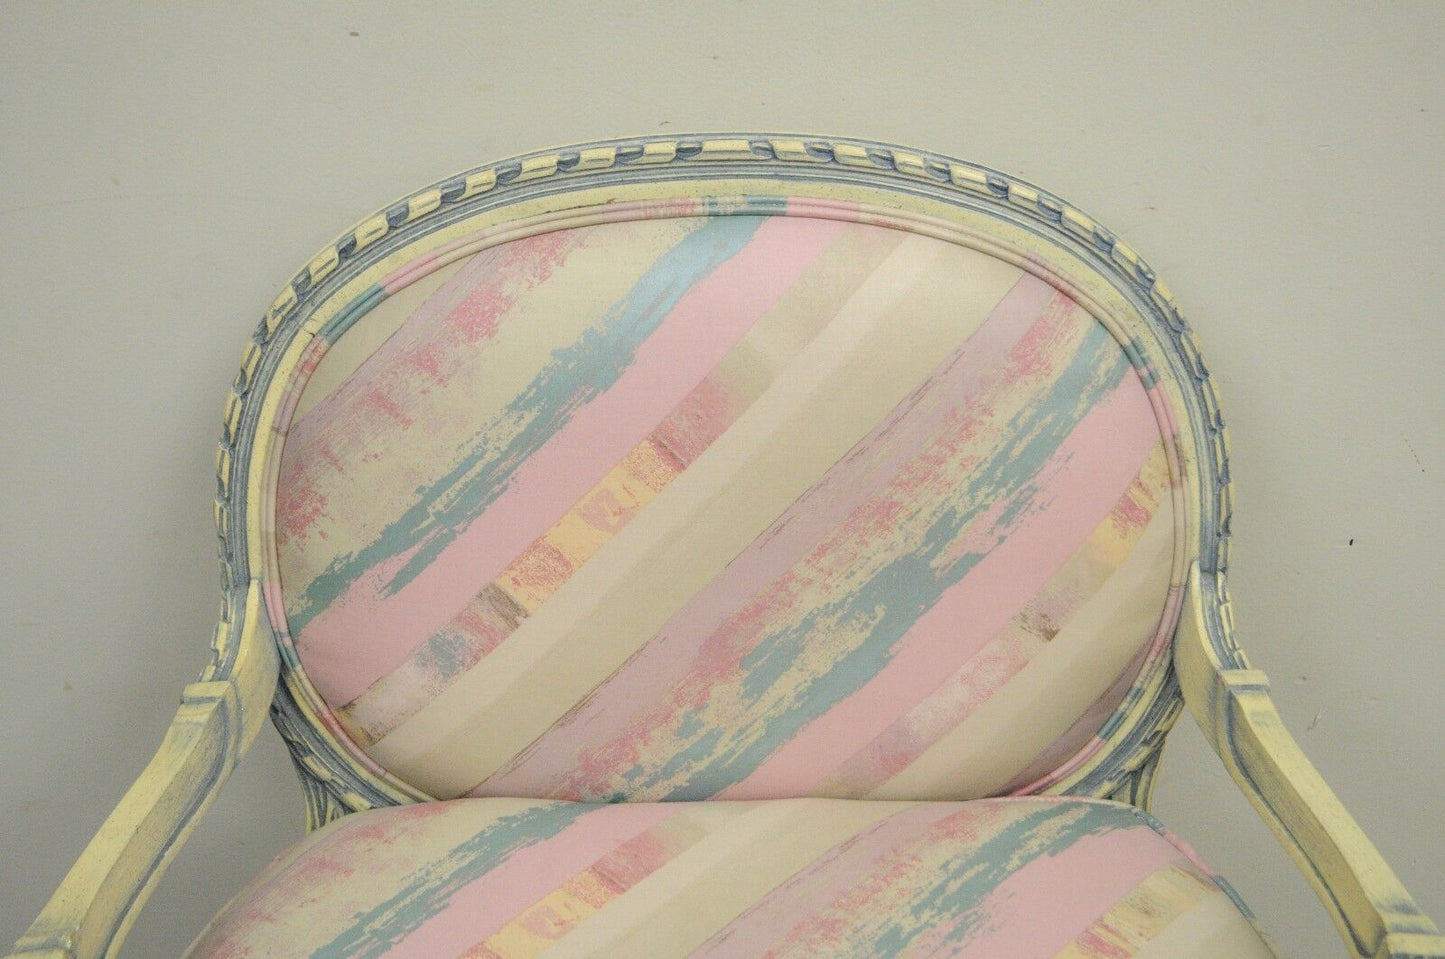 Vtg French Louis XVI Style Pink Blue Carved Bergere Boudoir Lounge Arm Chair